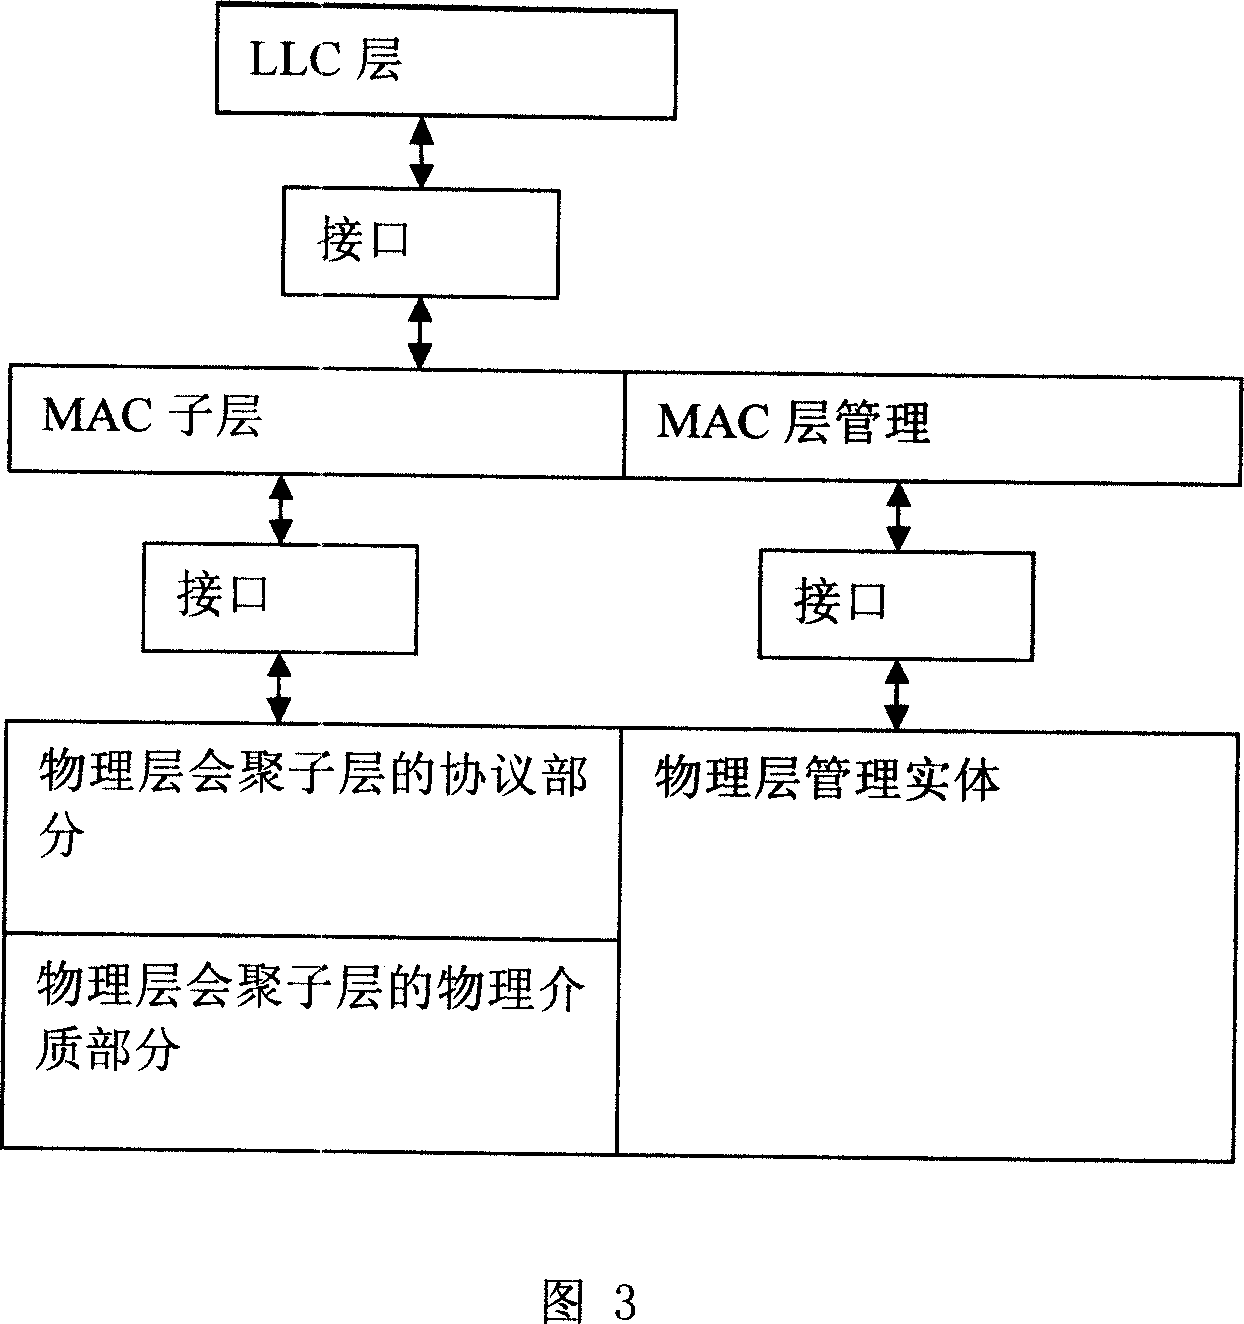 Communication method for onboard units and byroad units of ETC system based on WLAN